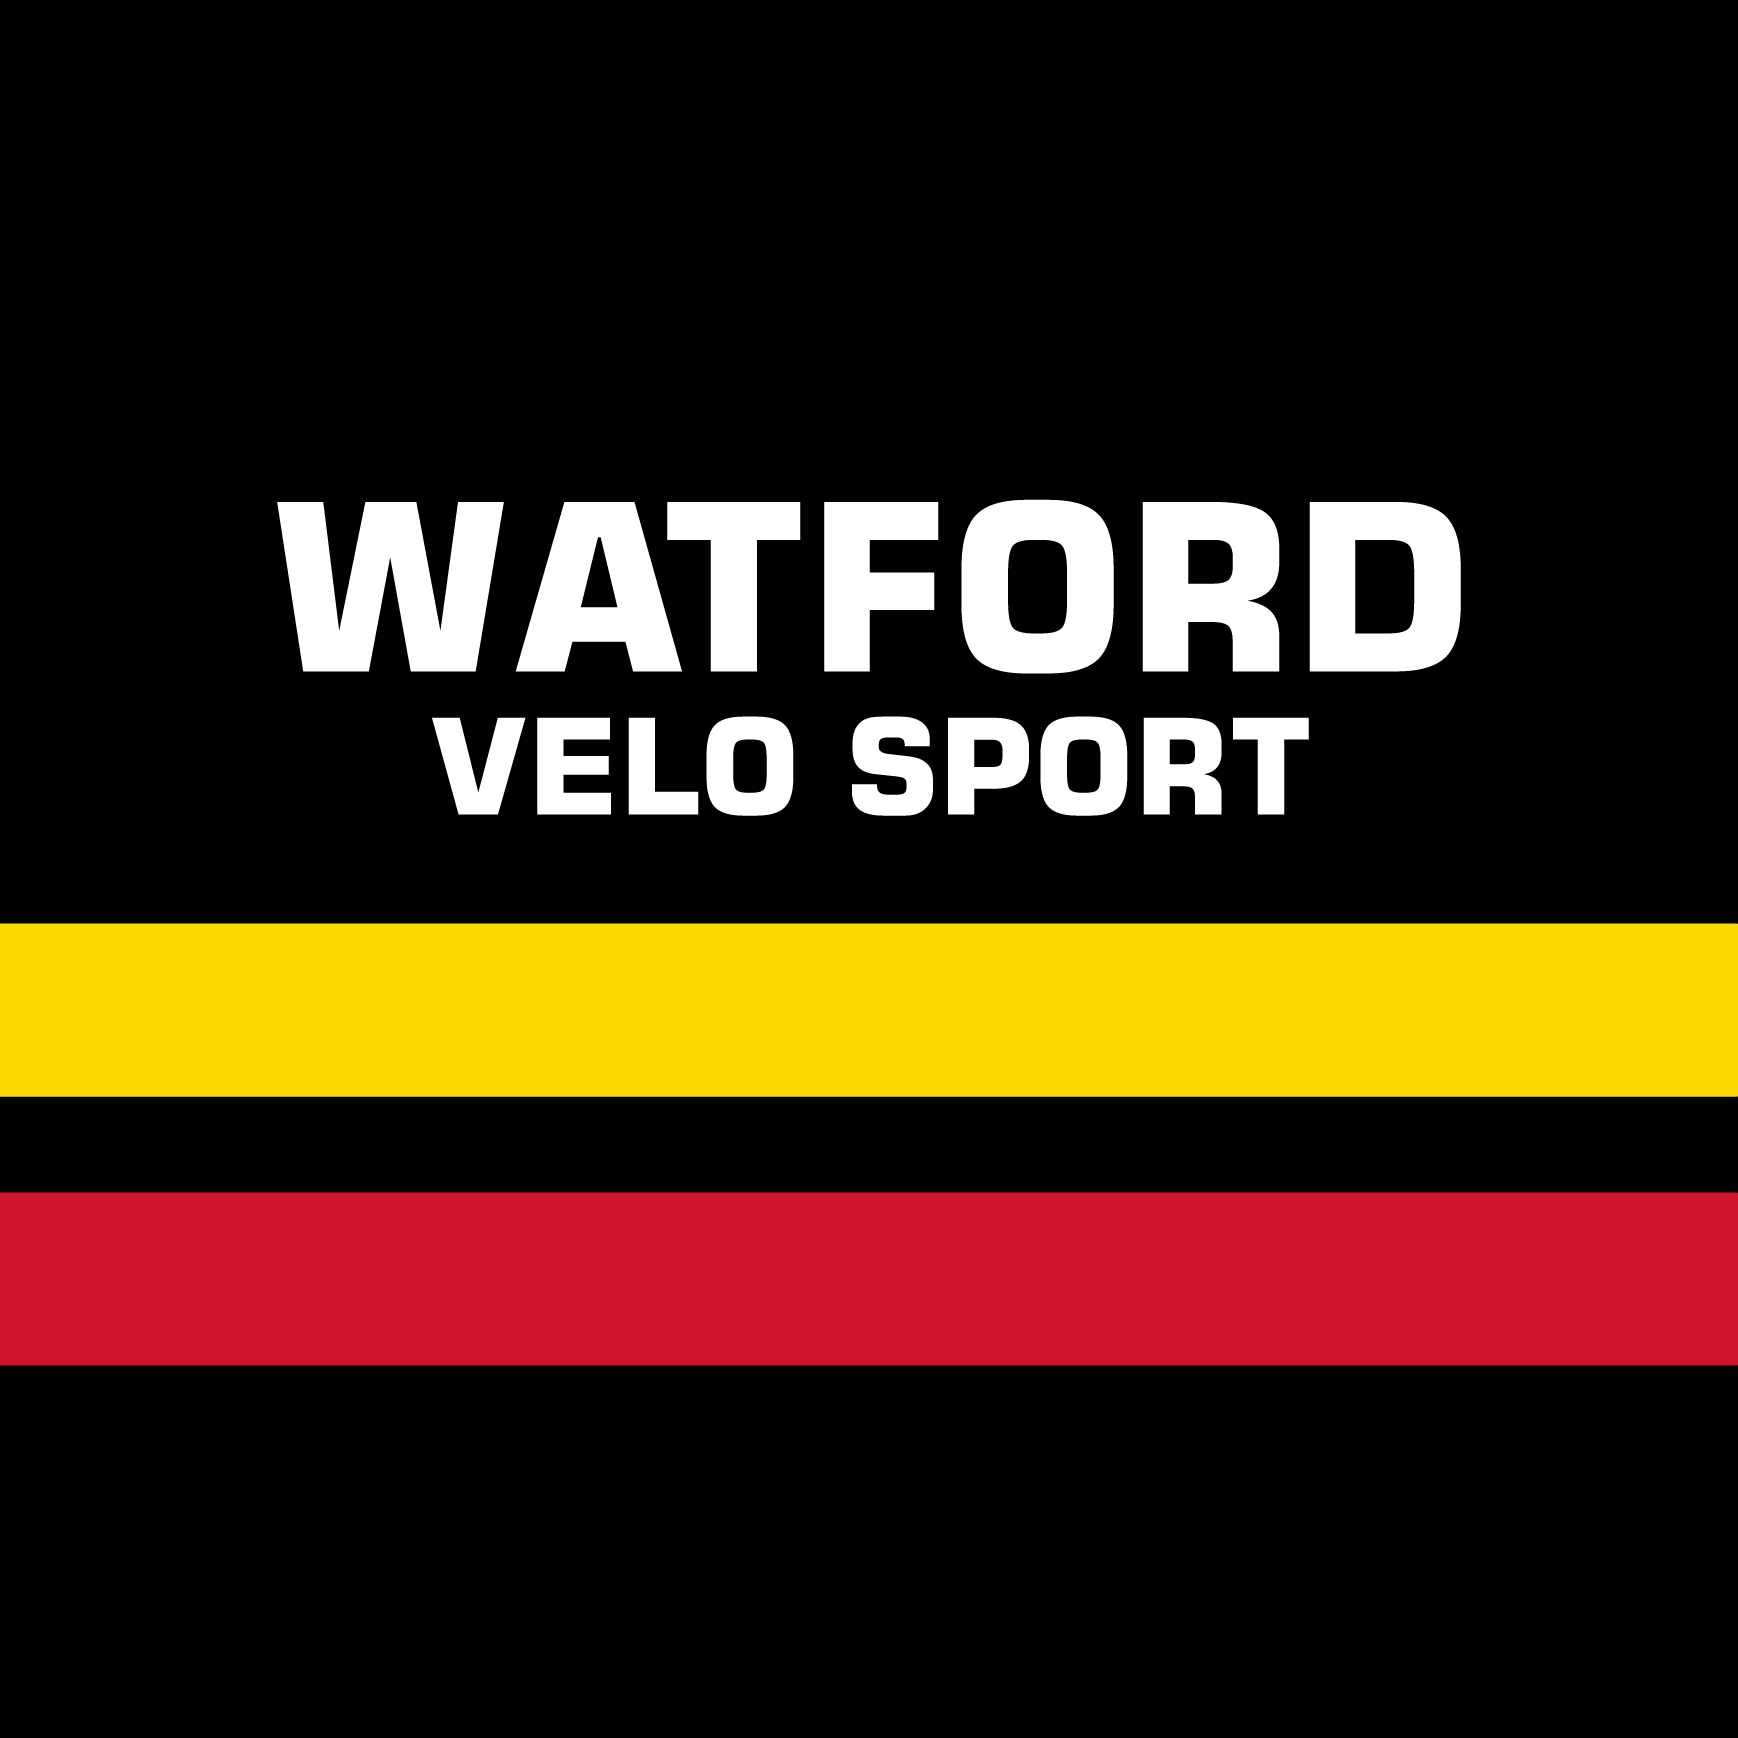 Club Image for WATFORD VELO SPORT